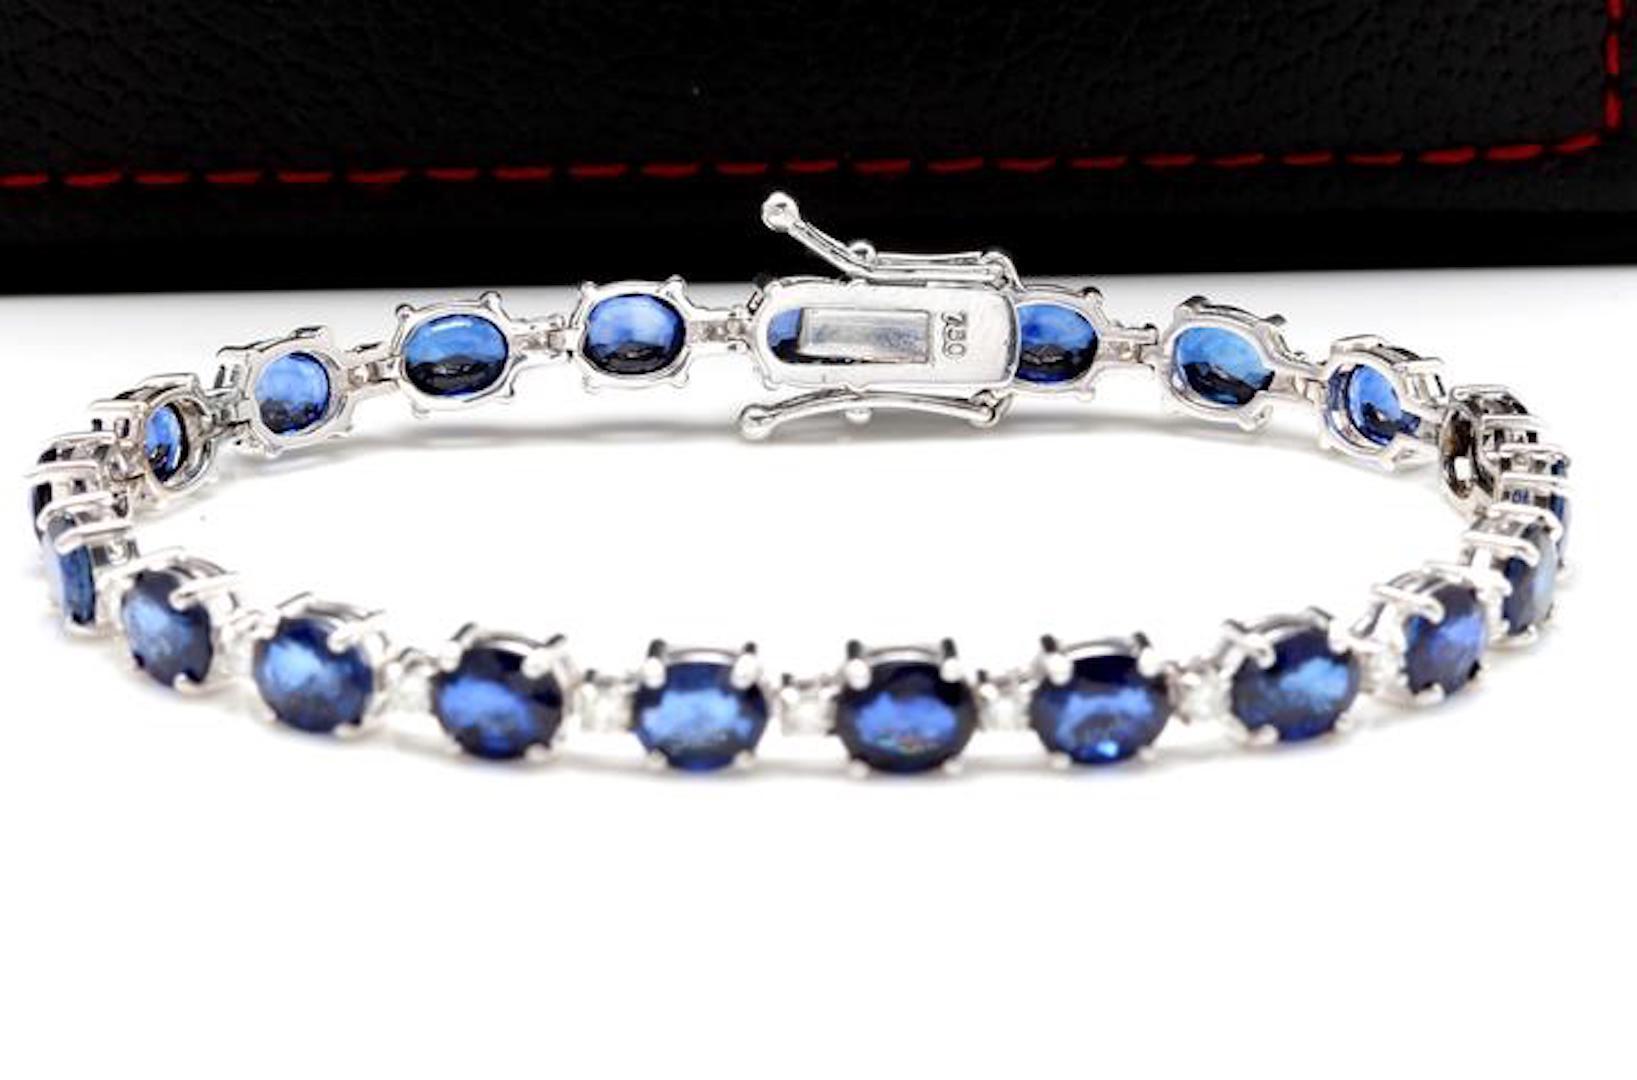 Very Impressive 16.24 Carats Natural Sapphire & Diamond 14K Solid White Gold Bracelet

STAMPED: 14K

Total Natural Round Diamonds Weight: Approx. 0.92 Carats (color G-H / Clarity SI1-Si2)

Total Natural Sapphire Weight is: Approx. 15.32